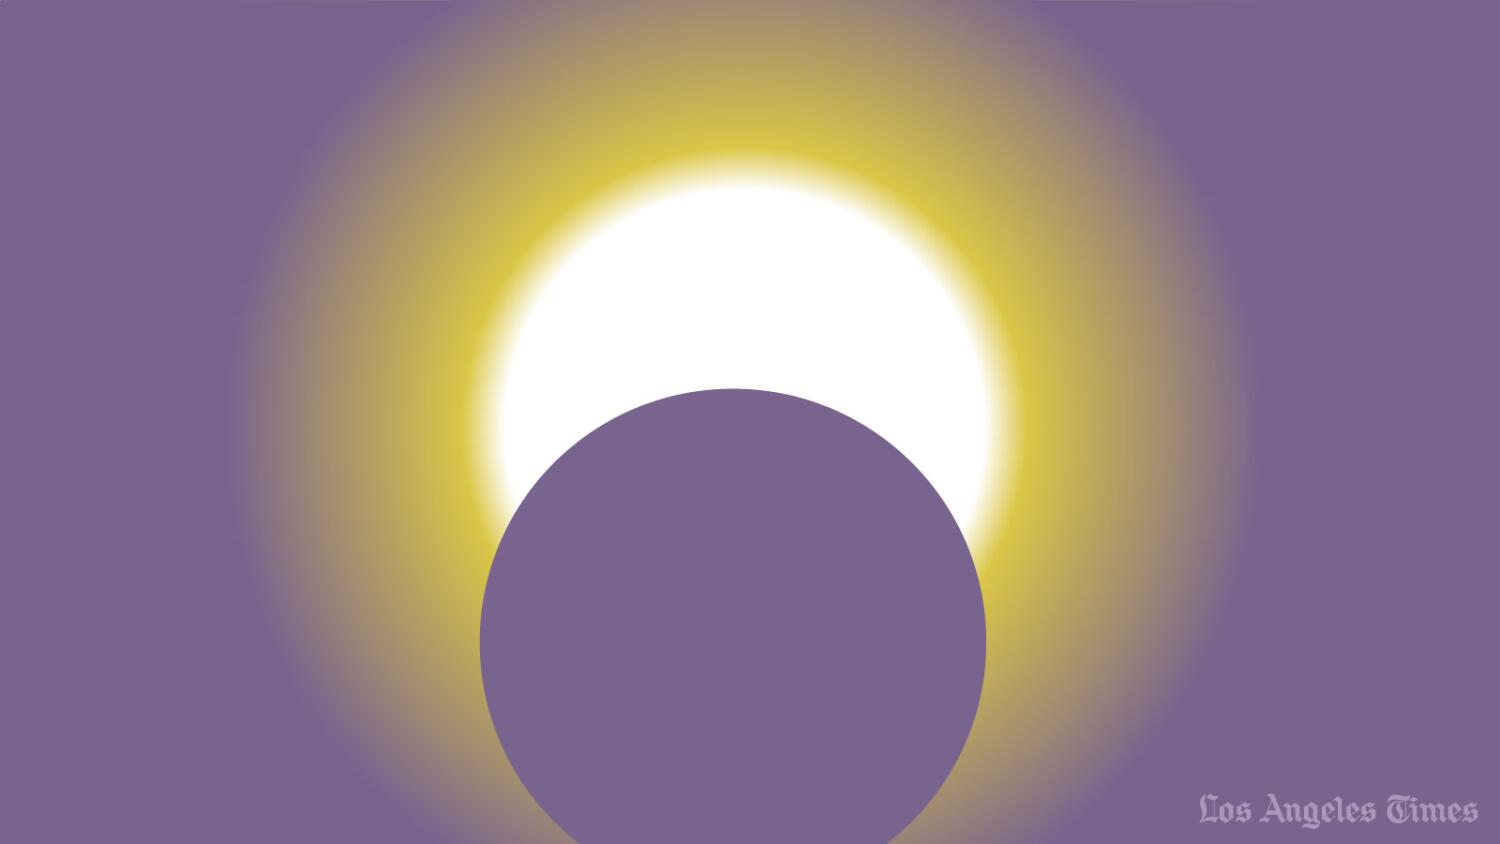 ?url=https%3A%2F%2Fcalifornia times brightspot.s3.amazonaws.com%2F71%2Fff%2Fbd3b74be46a69f40fae6b7f6e2f9%2Fla solar eclipse animation poster 2024 04 08